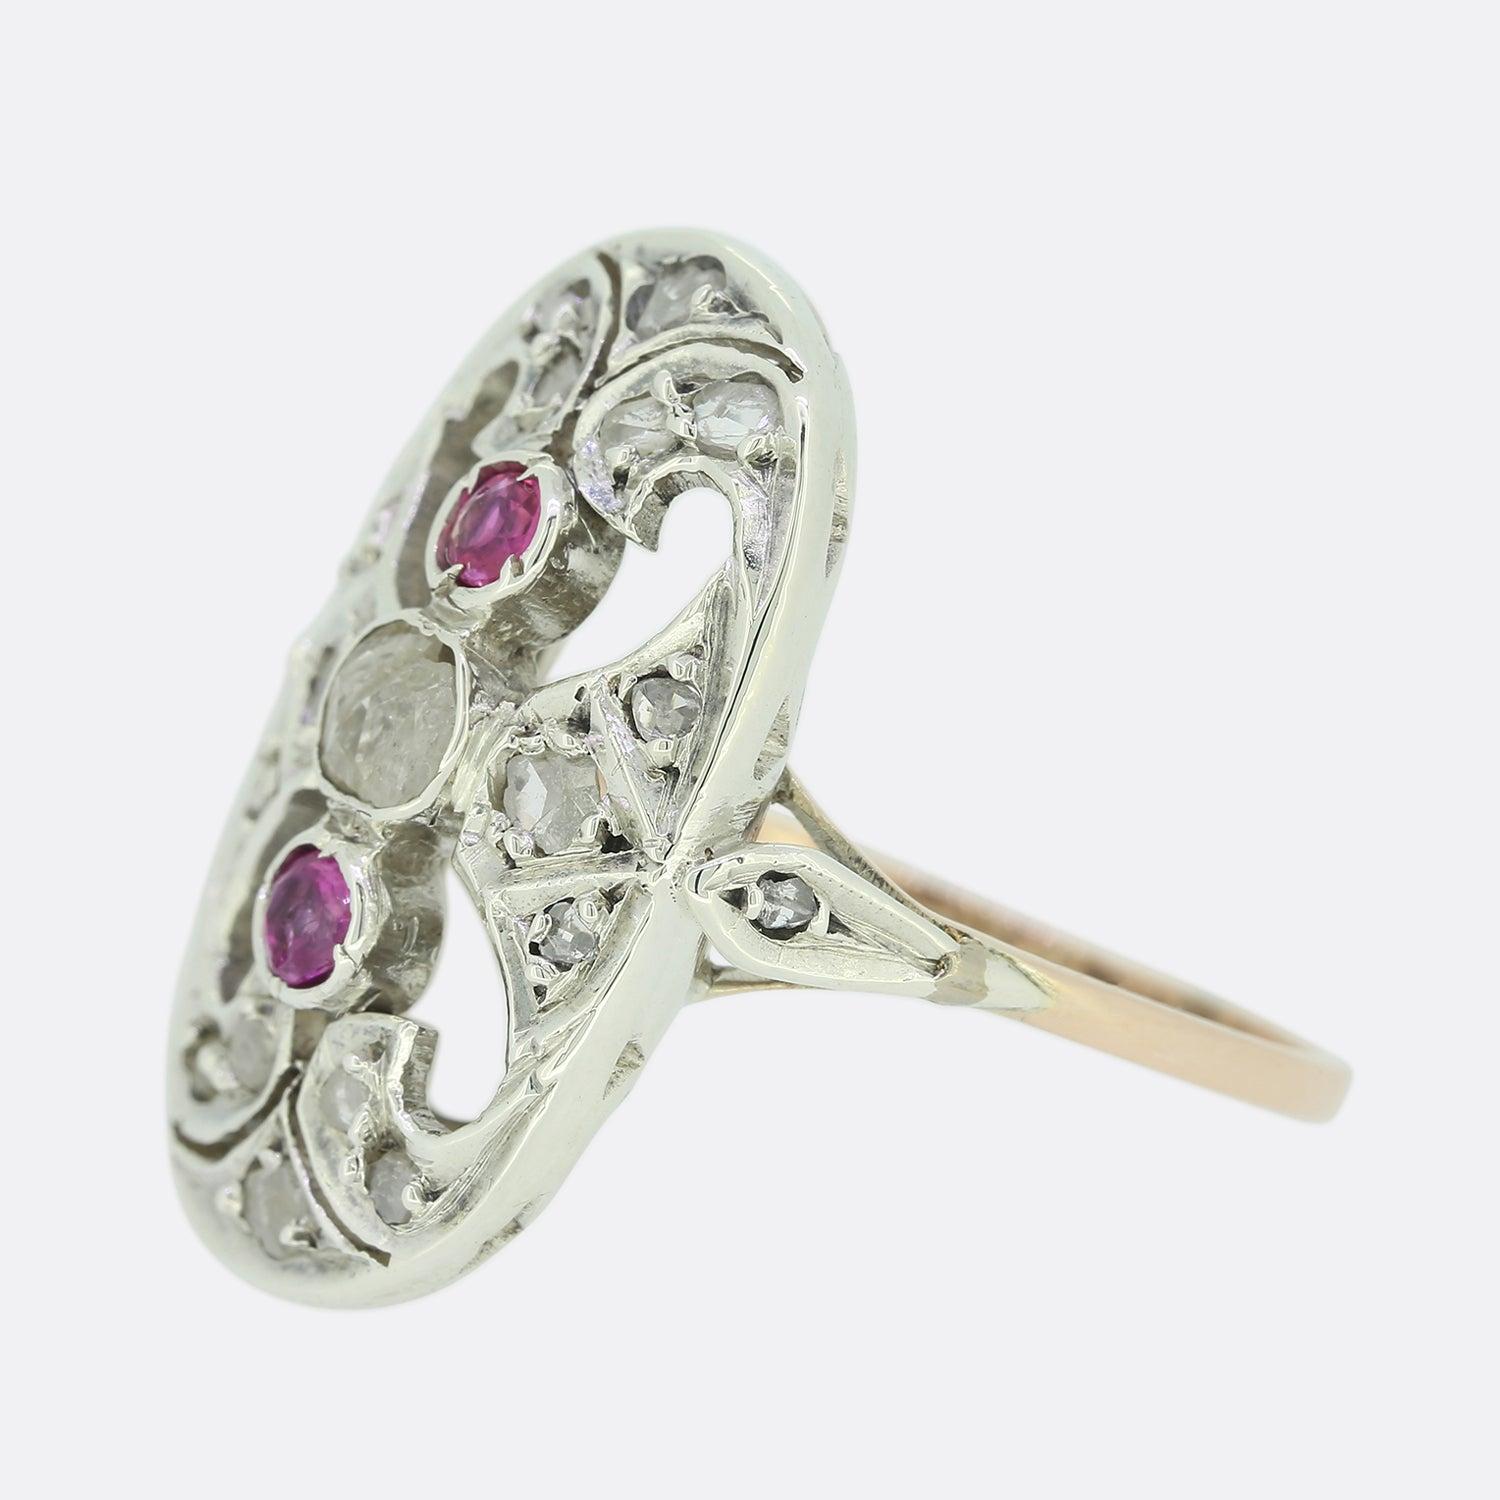 This is a lovely Edwardian pink sapphire and diamond ring. It features a central rose cut diamond with a pink sapphire set above and below and surrounded by a border of more rose cut diamonds in an oval shaped setting. The navette ring has been